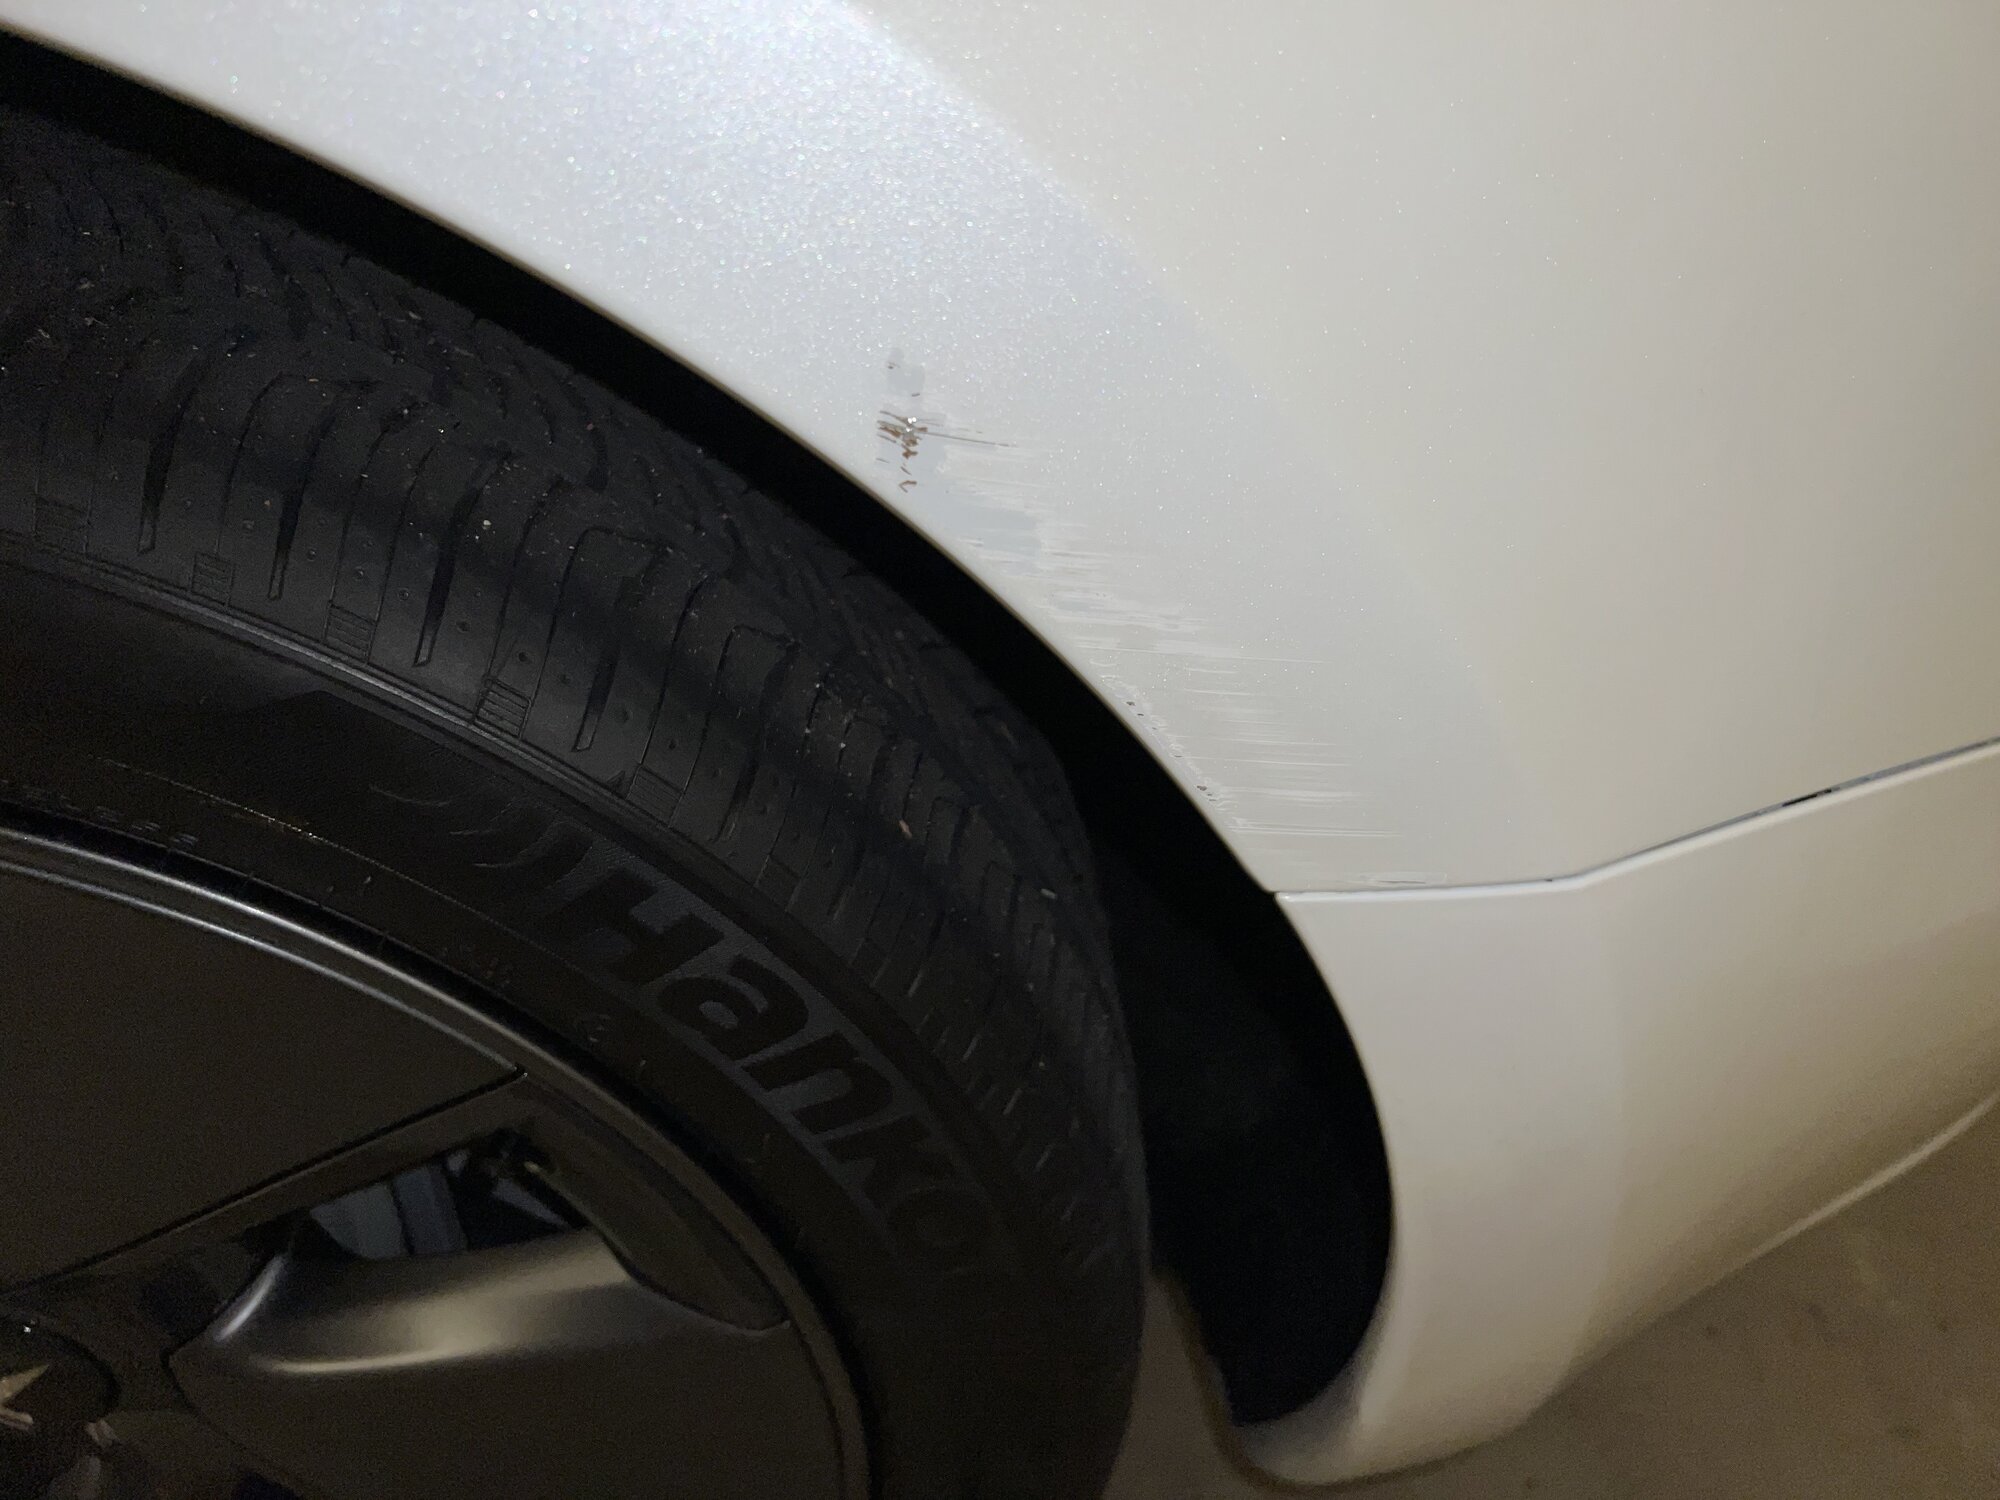 Will Dr colorchip help with this, while backing up i brushed the parking  piller and it was very rough so this happend on the rear fender | Tesla  Motors Club